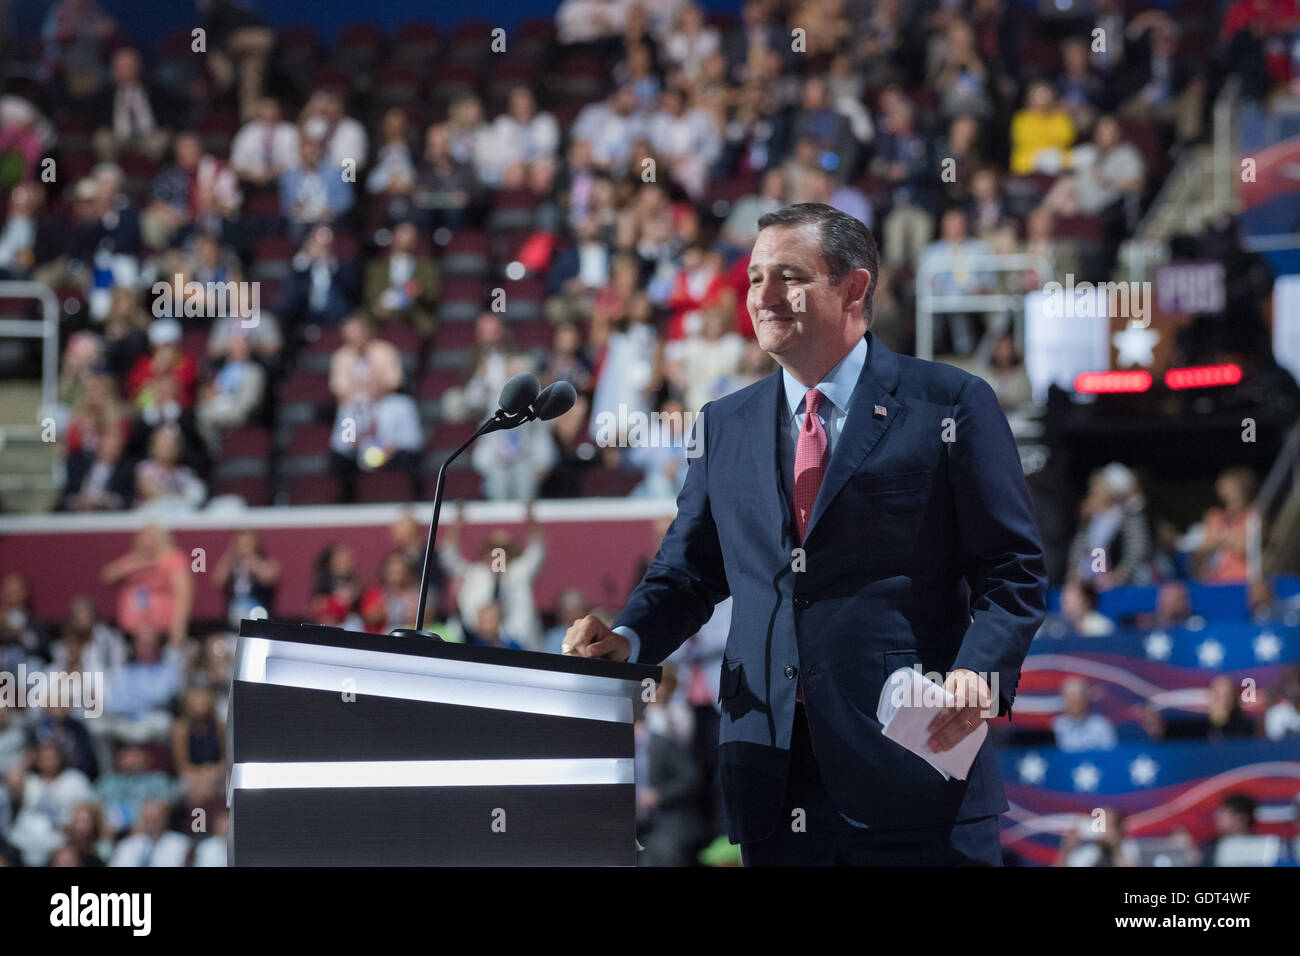 Senator Ted Cruz steps back from the podium after being cut off by officials during his addresses during the third day of the Republican National Convention July 20, 2016 in Cleveland, Ohio. Cruz spoke without endorsing Republican Presidential candidate Donald Trump and told delegates to vote with their conscience. Stock Photo